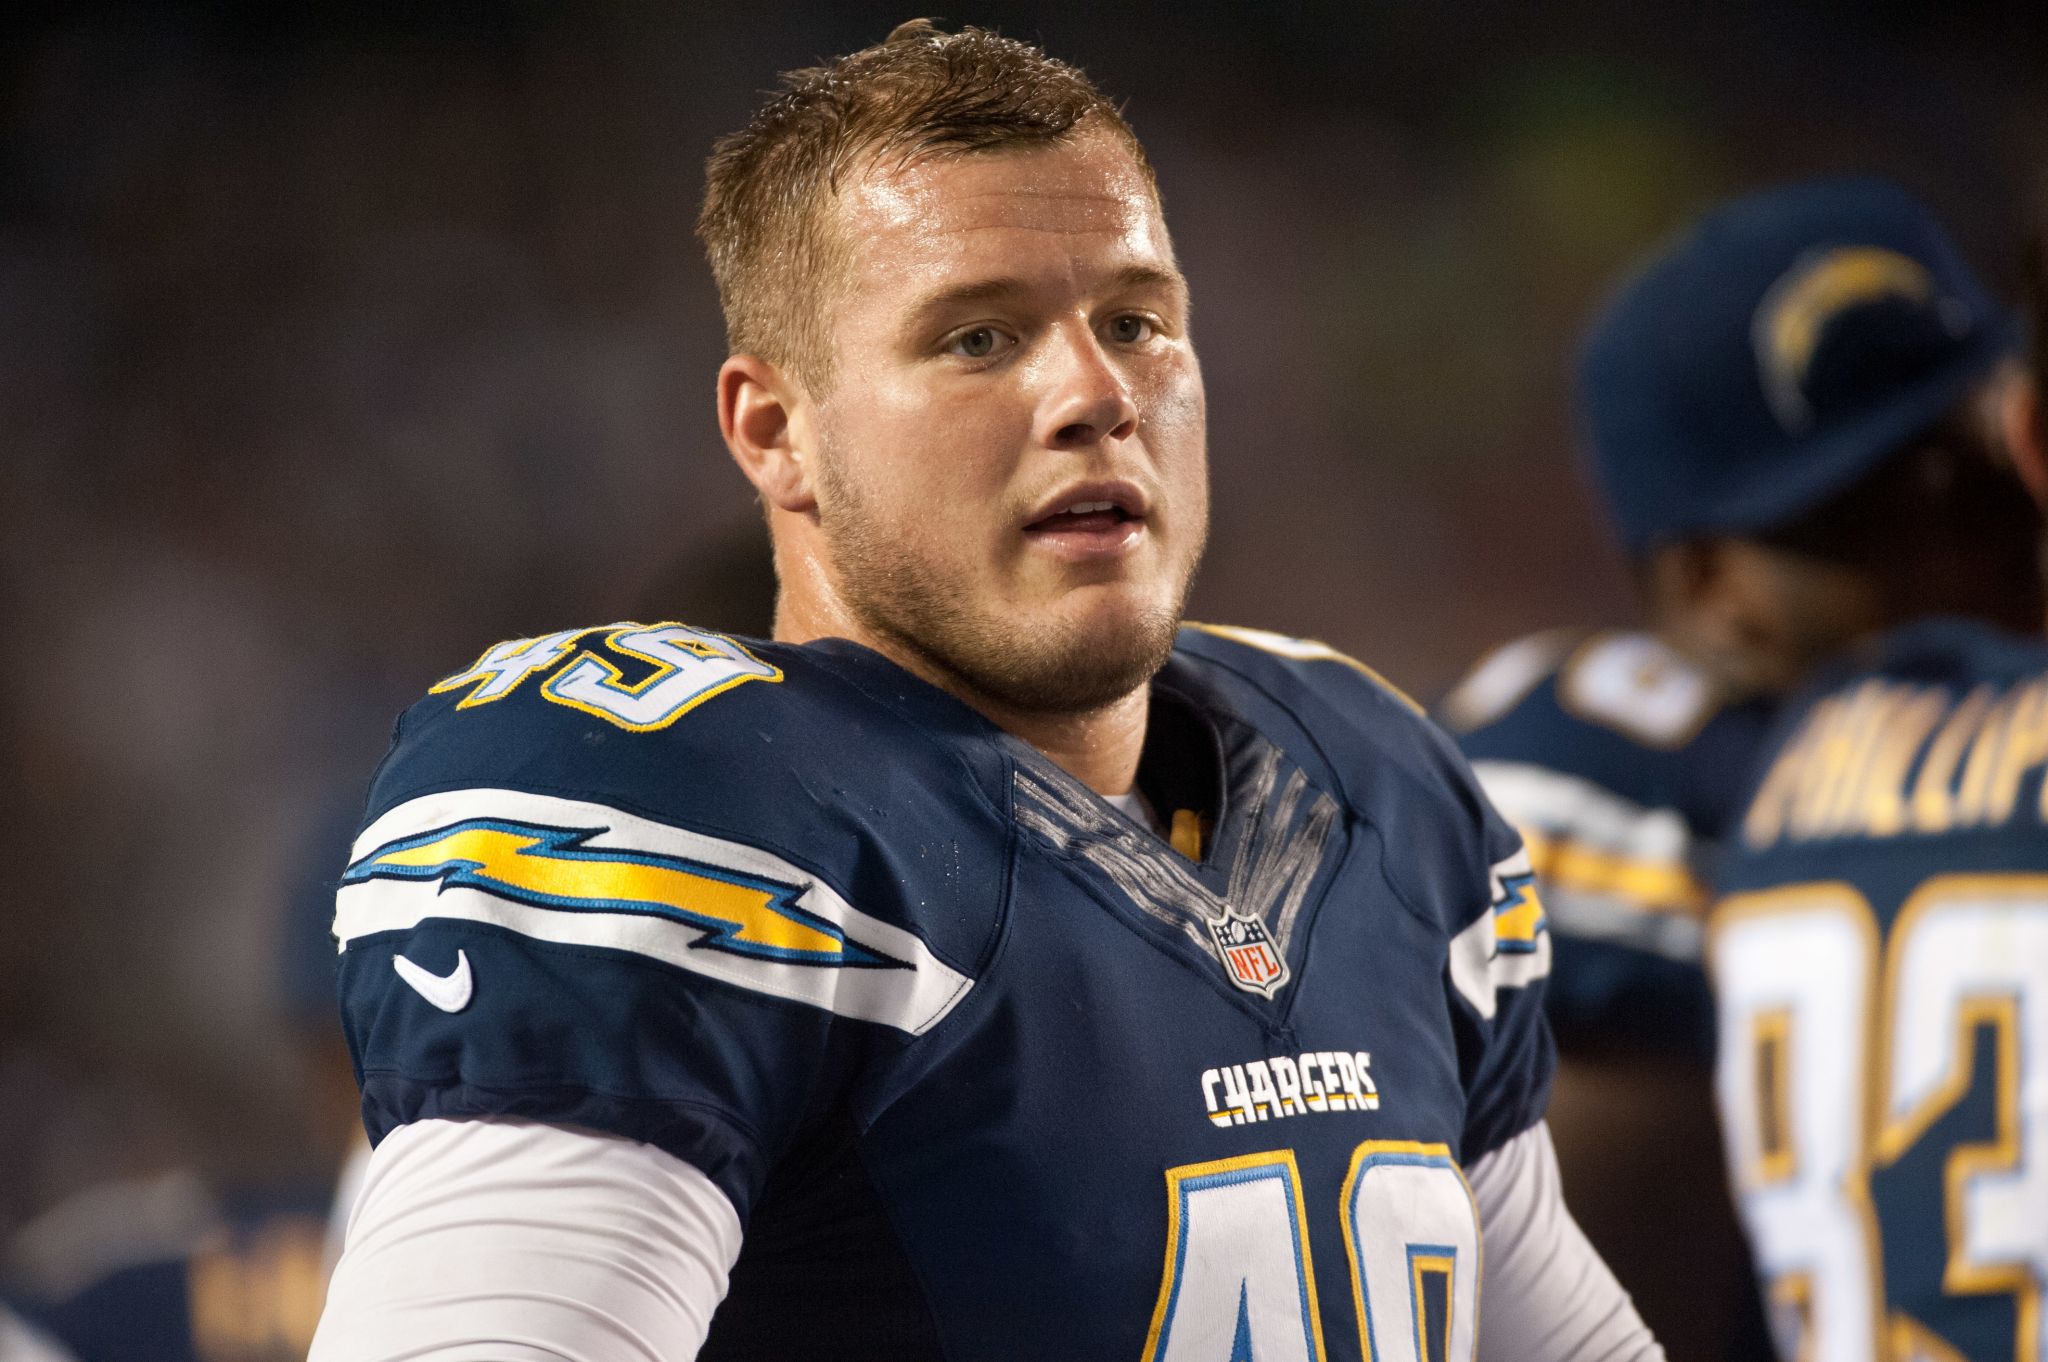 A look at The Bachelor's Colton Underwood's NFL career